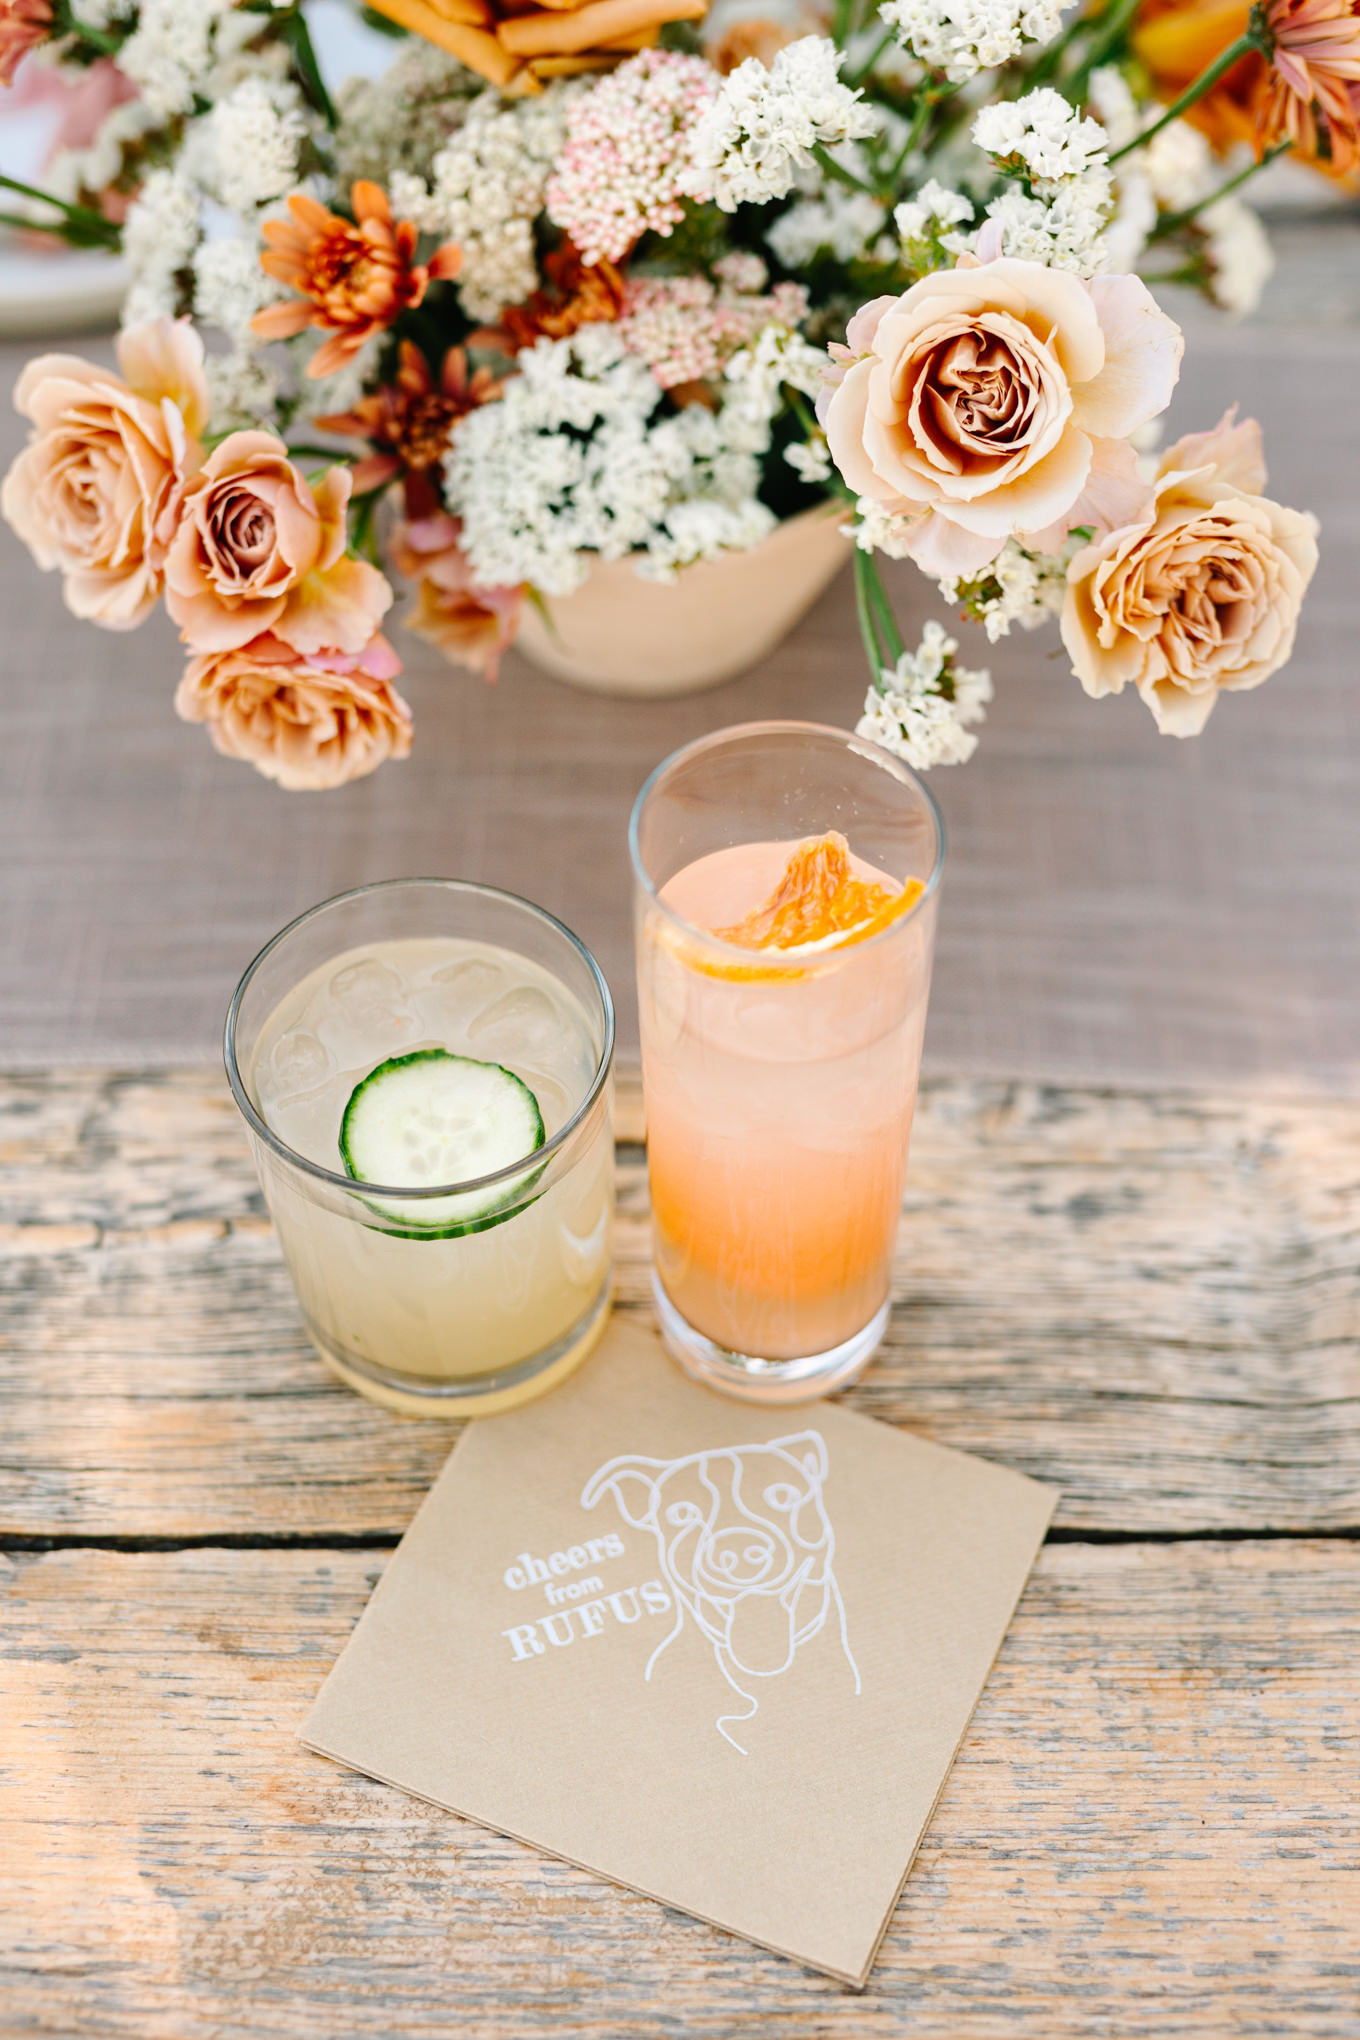 Signature cocktails with napkin | Pink and orange Lautner Compound wedding | Colorful Palm Springs wedding photography | #palmspringsphotographer #palmspringswedding #lautnercompound #southerncaliforniawedding  Source: Mary Costa Photography | Los Angeles